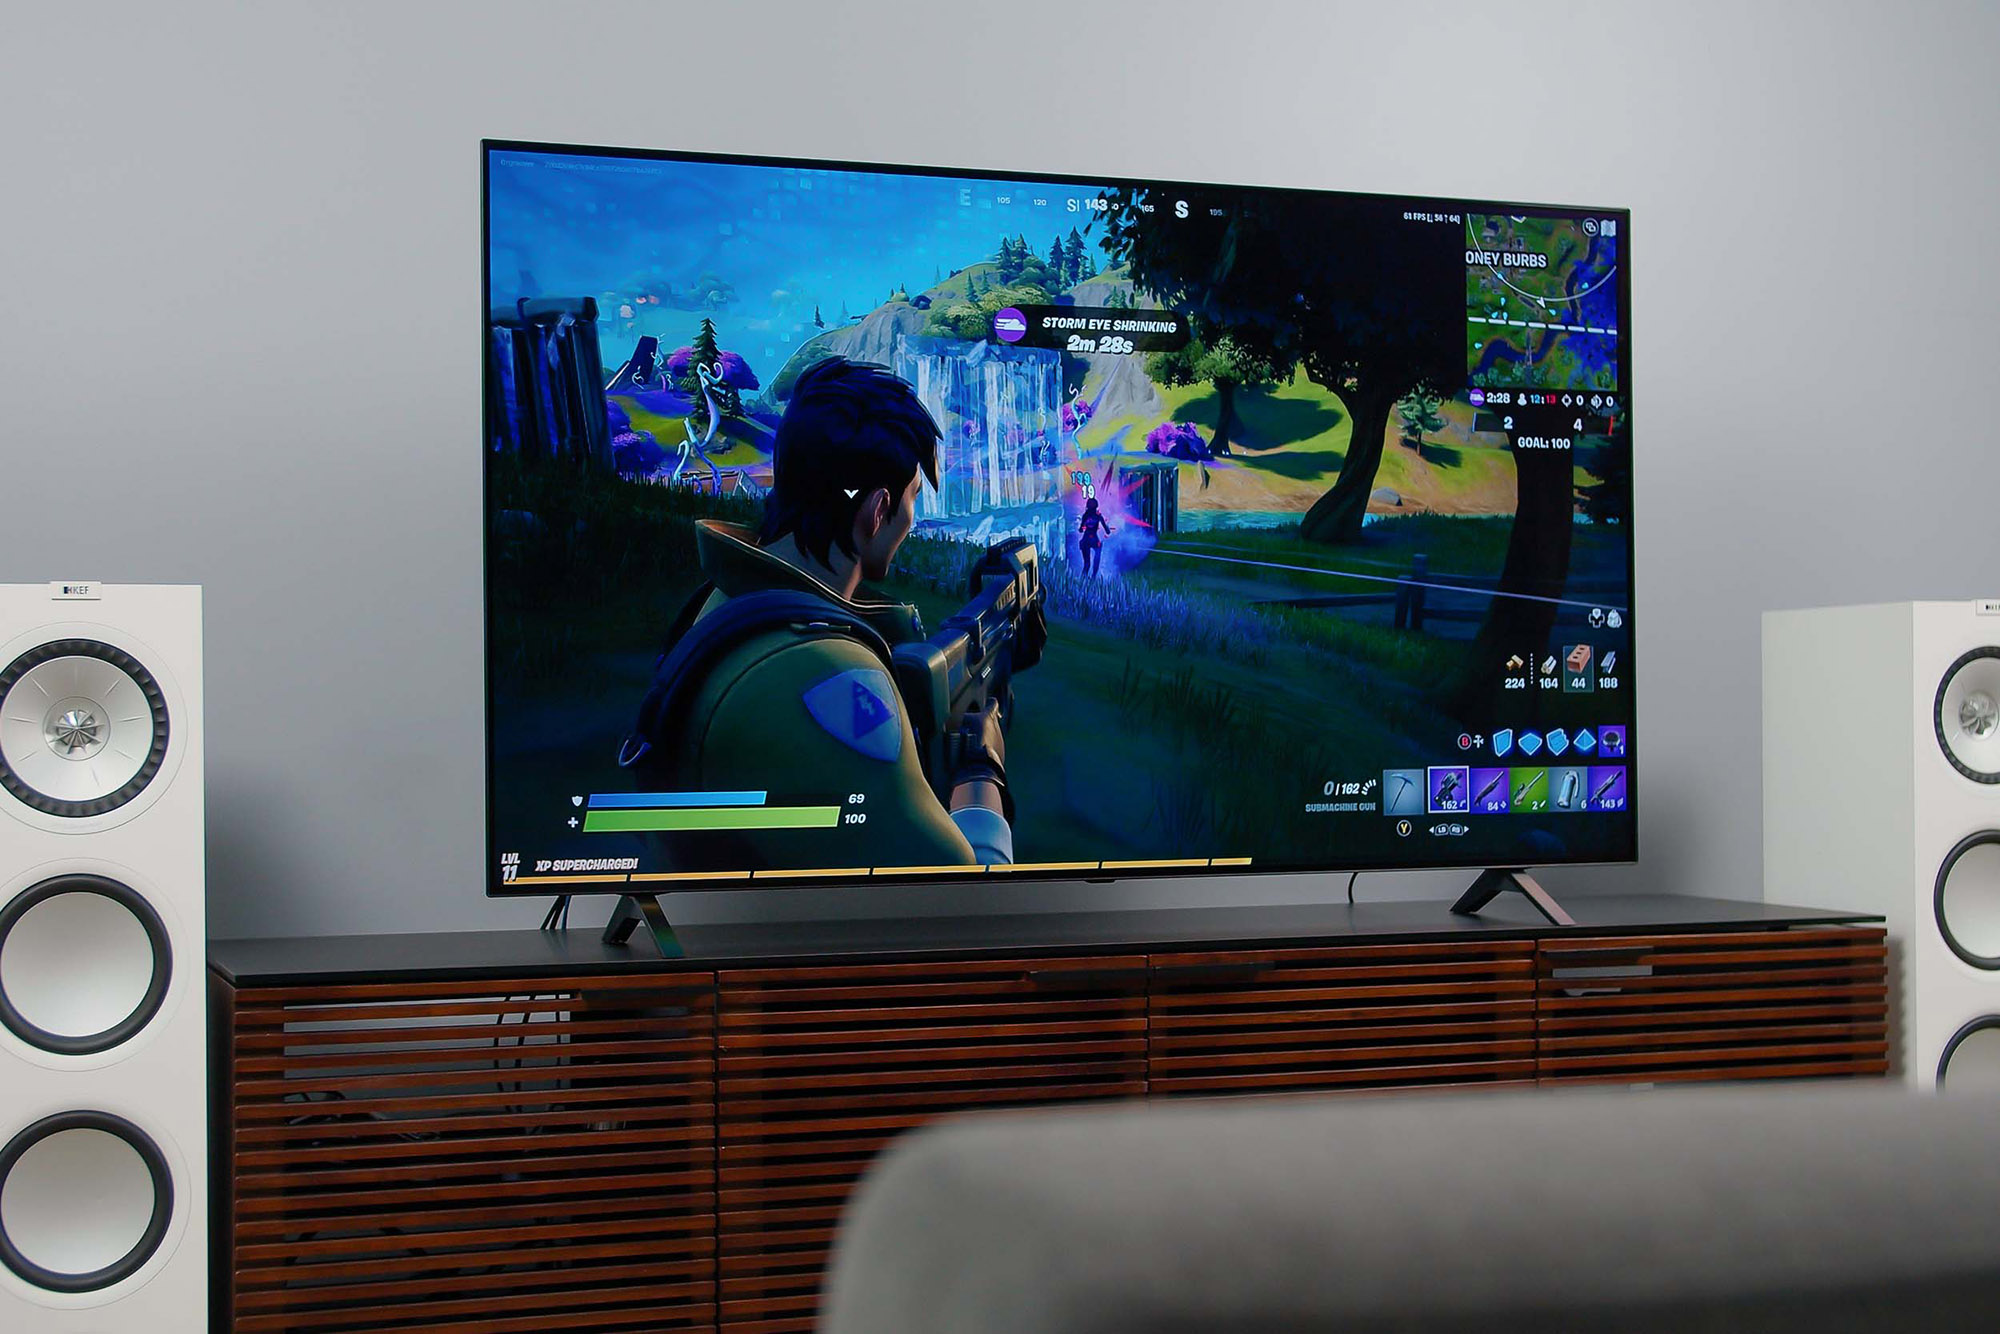 Fortnite video game being played on the LG A1 OLED 4K HDR TV.